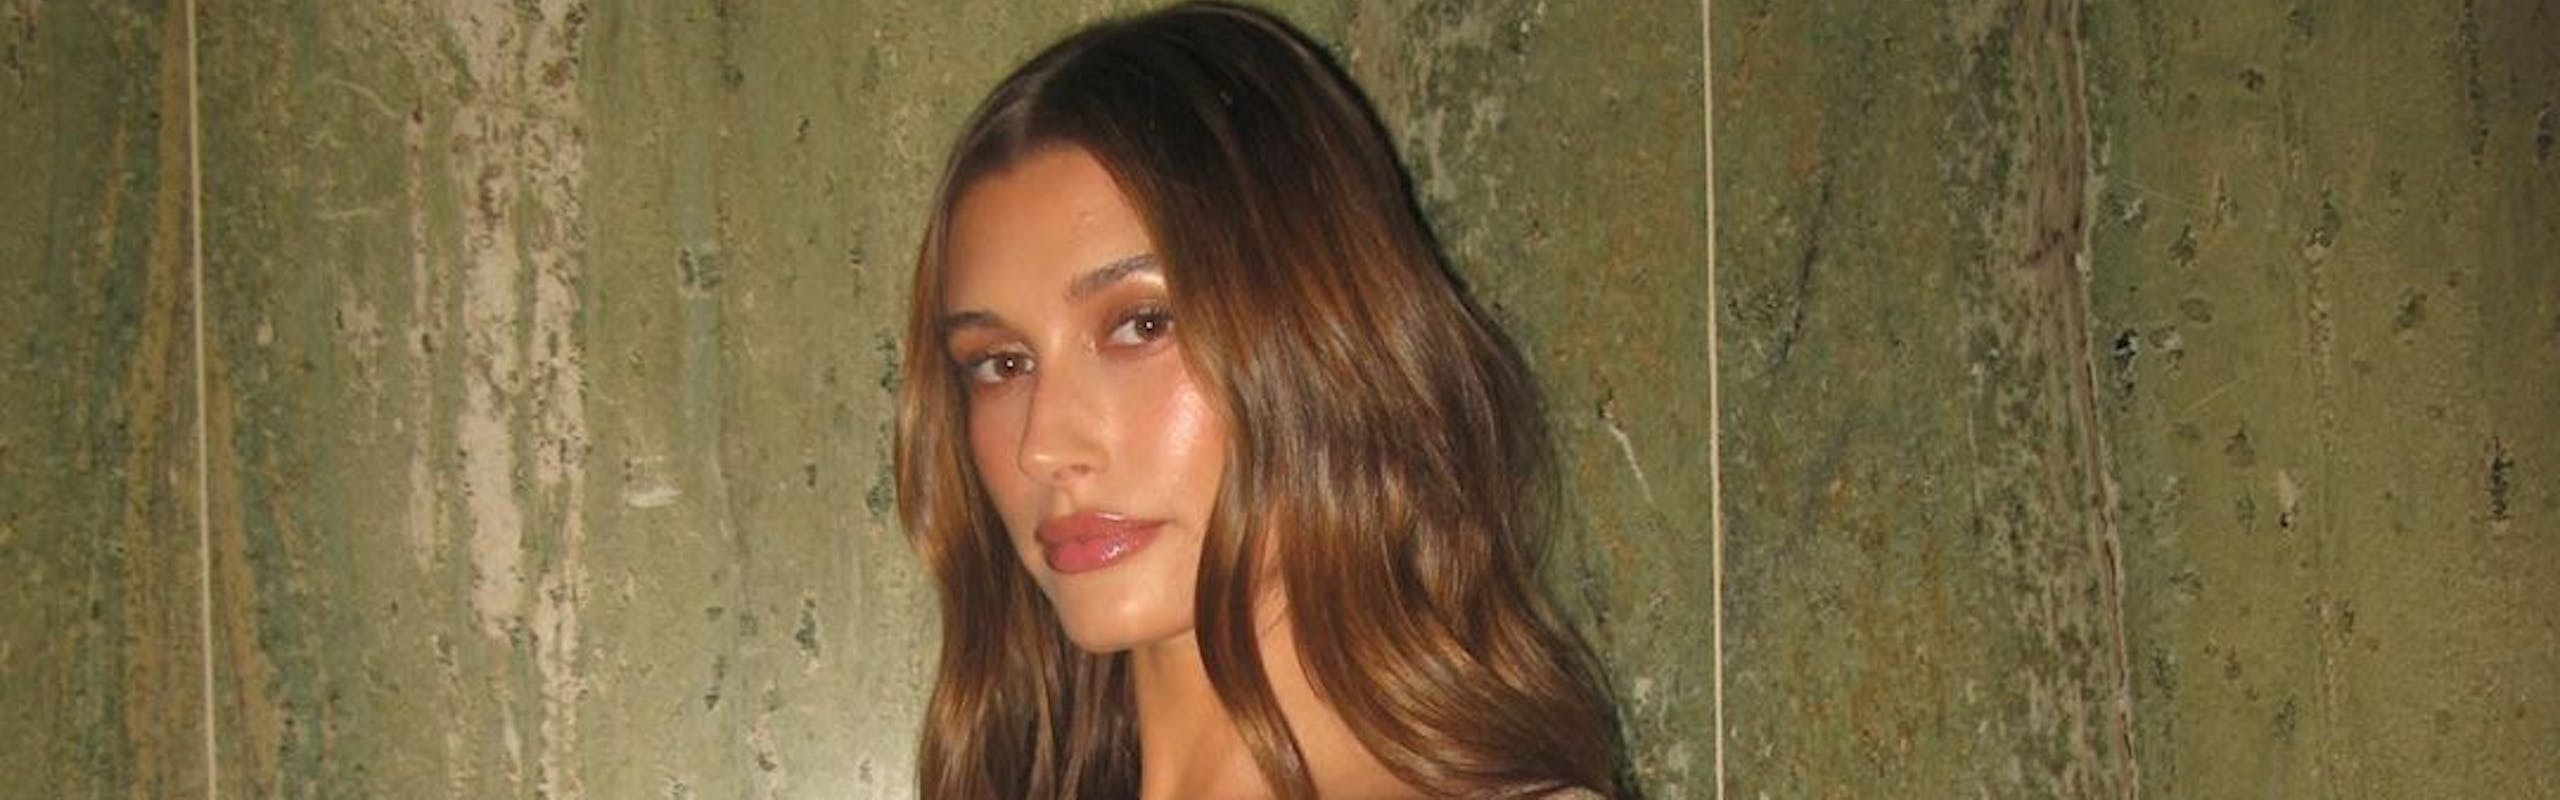 Hailey Bieber poses against a green wall in a nude sequined dress.